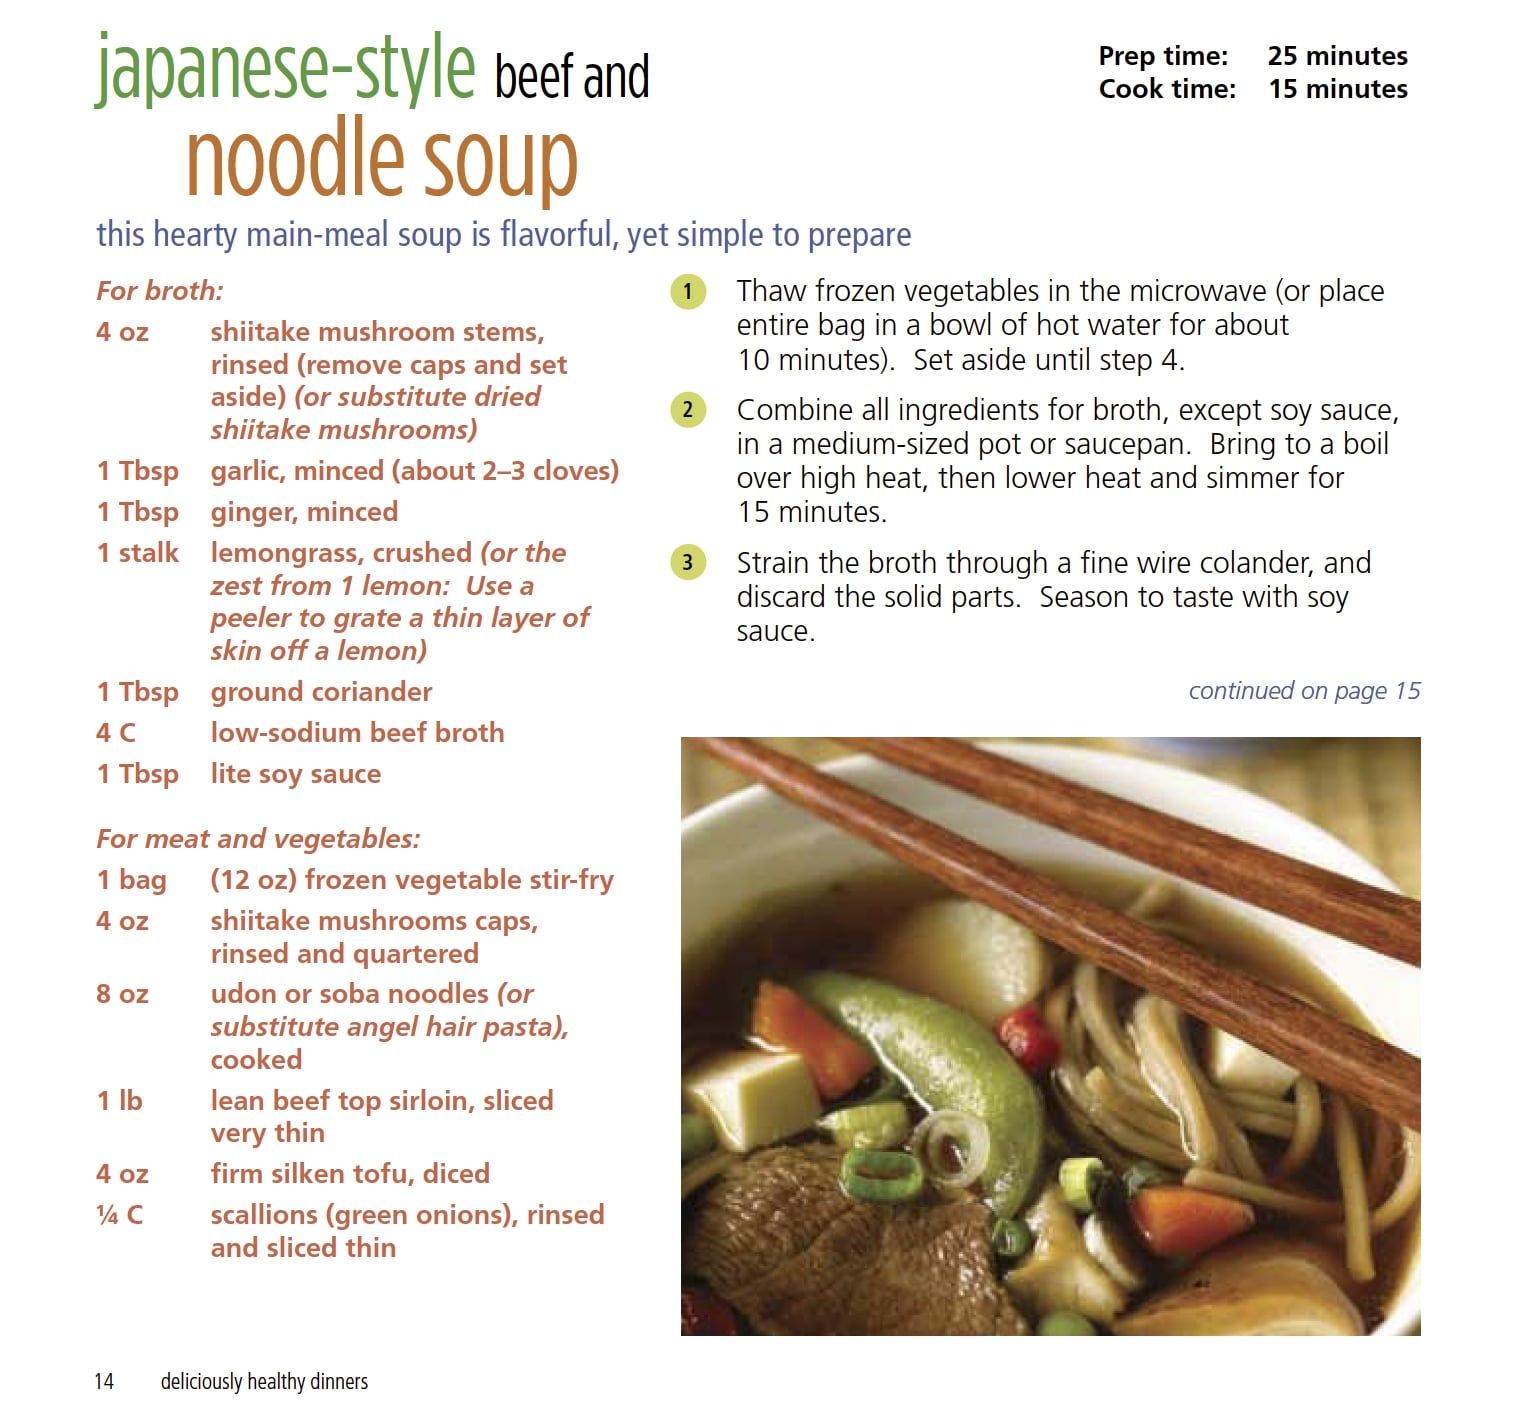 Recipe - Japanese style beef and noodle soup.